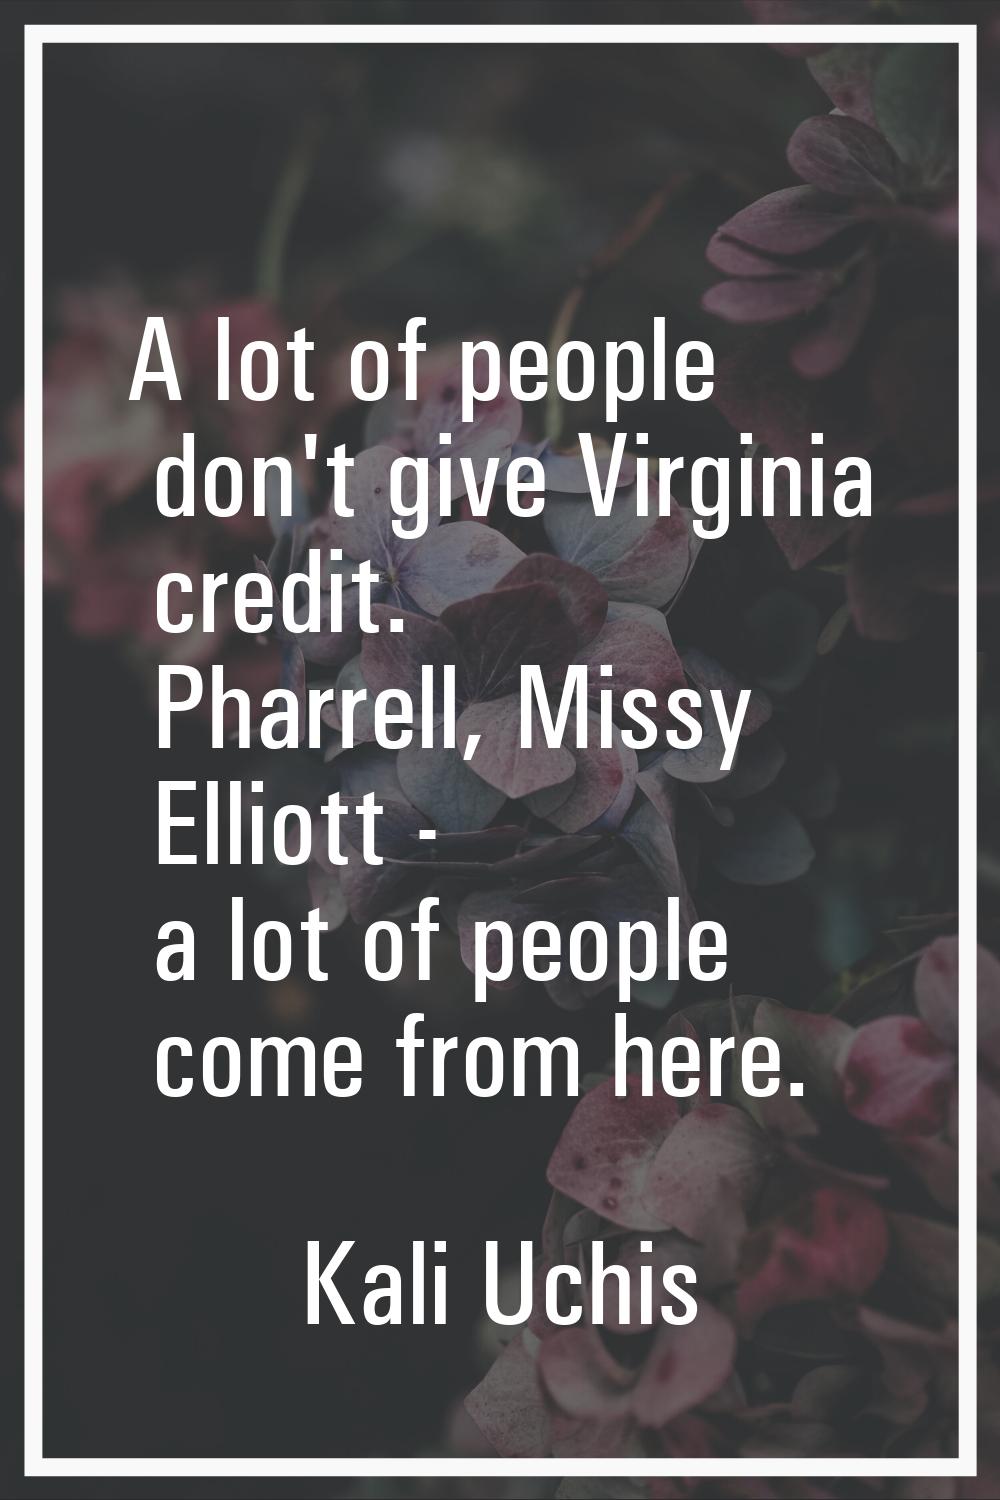 A lot of people don't give Virginia credit. Pharrell, Missy Elliott - a lot of people come from her